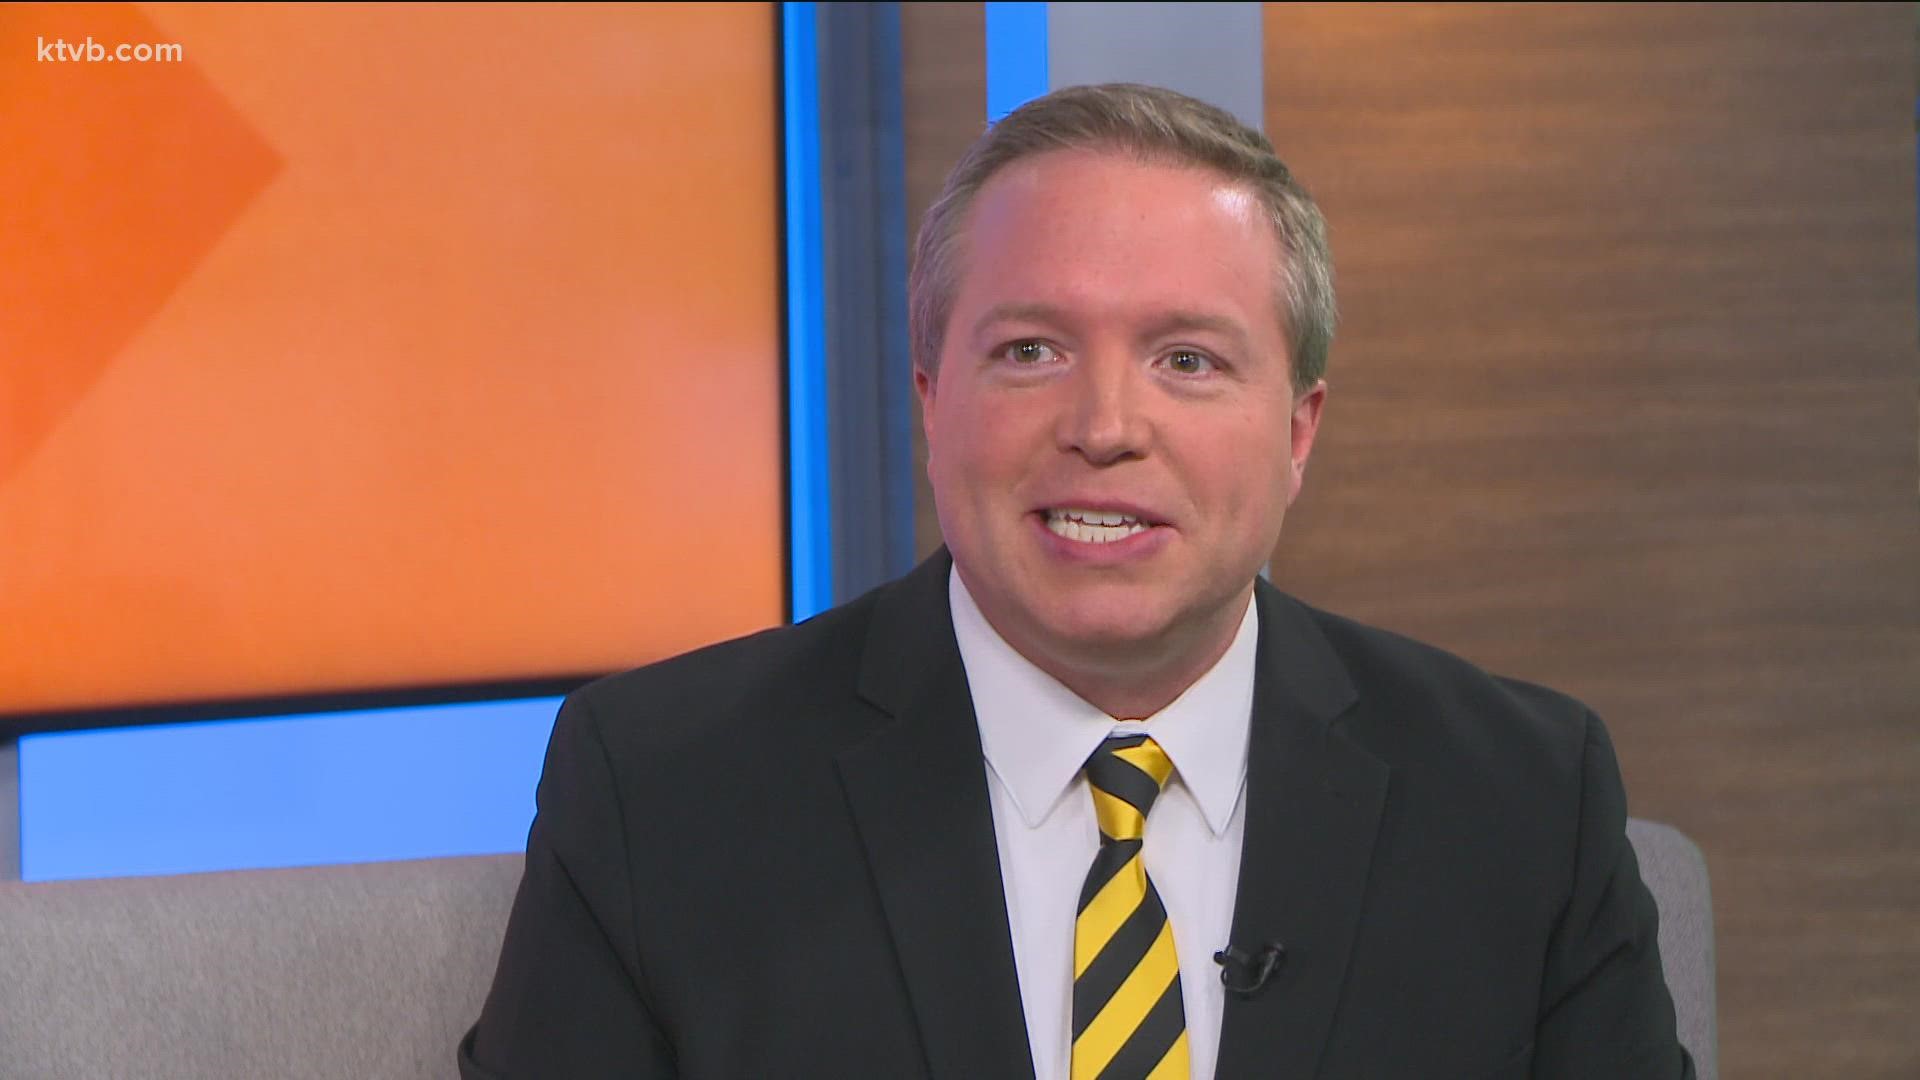 Justin Corr is an anchor at KTVB in Boise, Idaho.